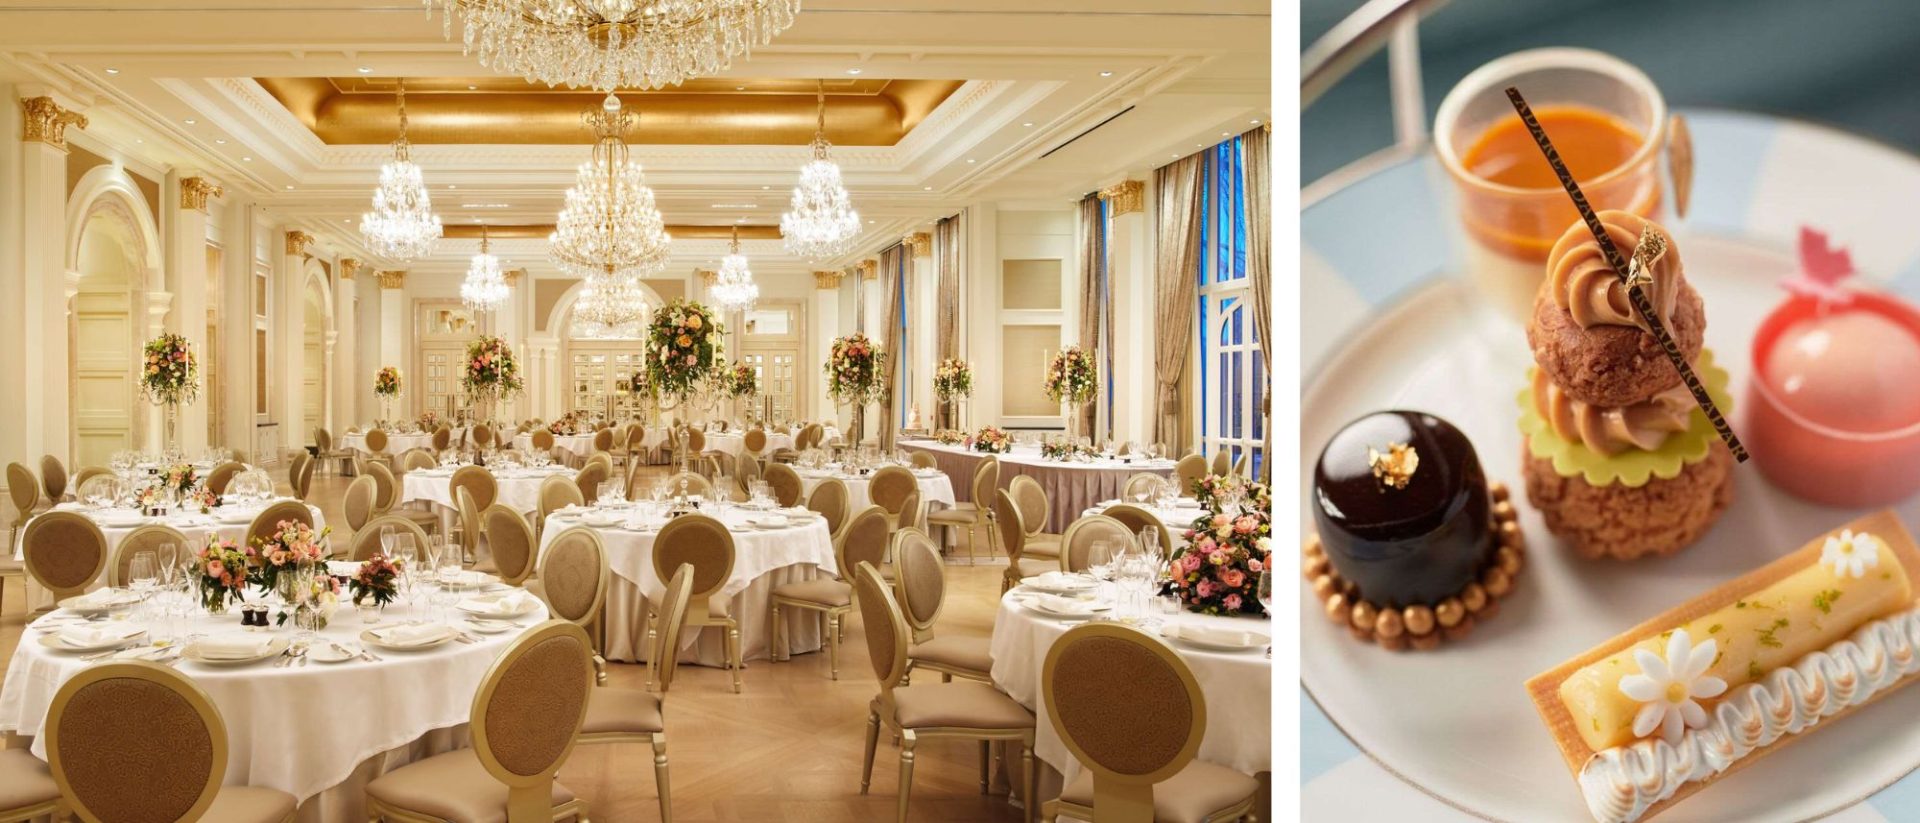 Two pictures of a banquet room with desserts and a chandelier.